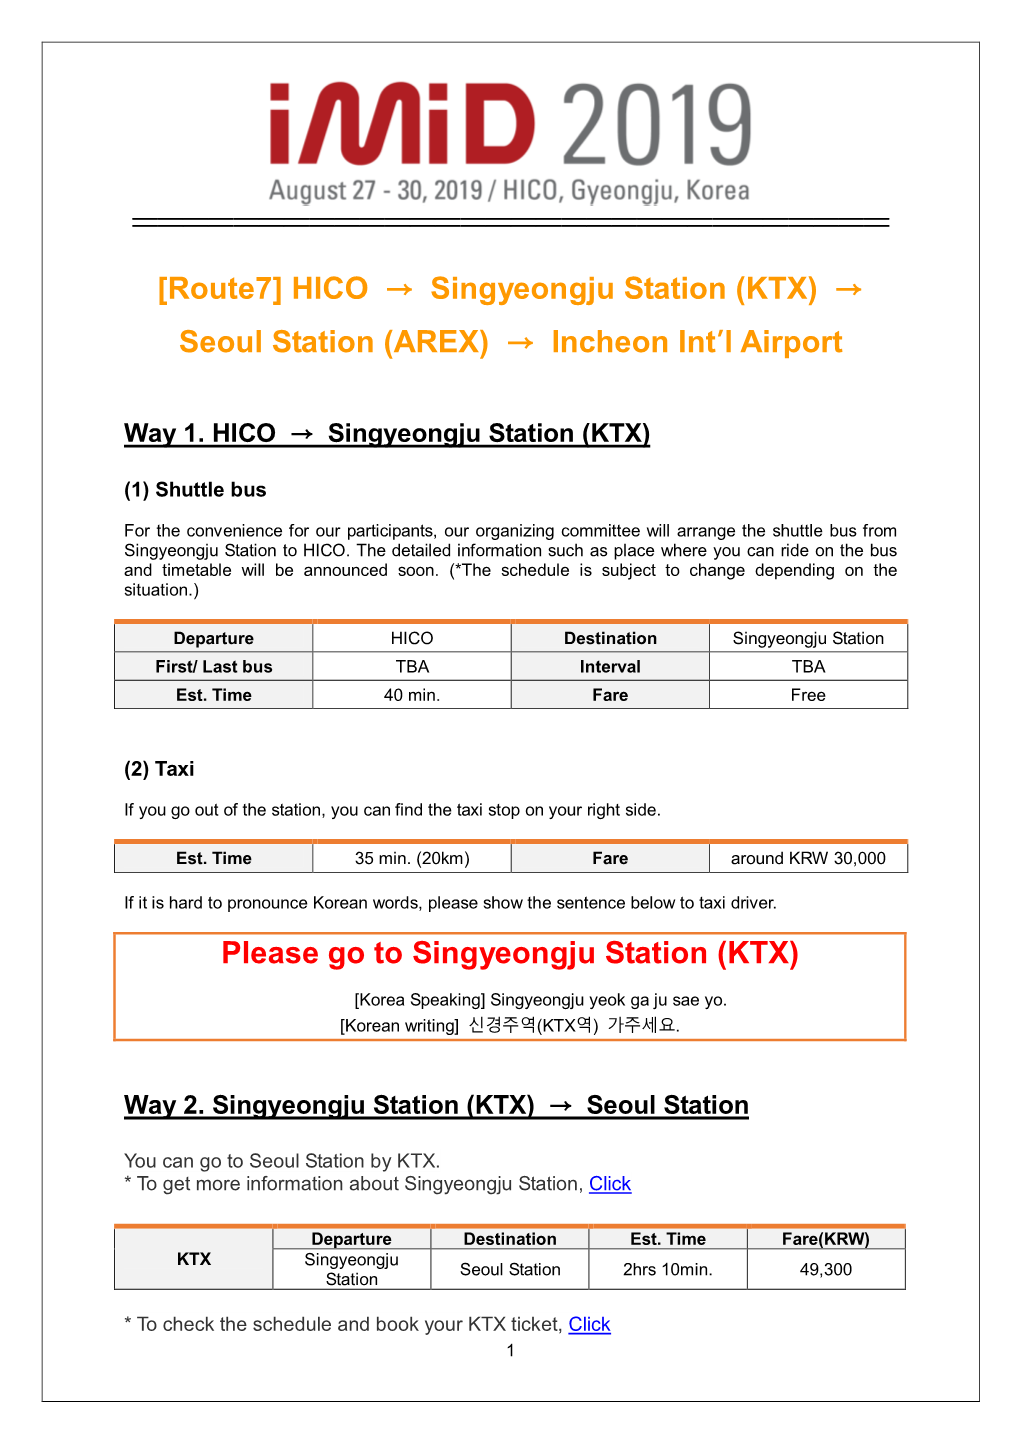 [Route7] HICO → Singyeongju Station (KTX) → Seoul Station (AREX) → Incheon Int'l Airport Please Go to Singyeongju Statio